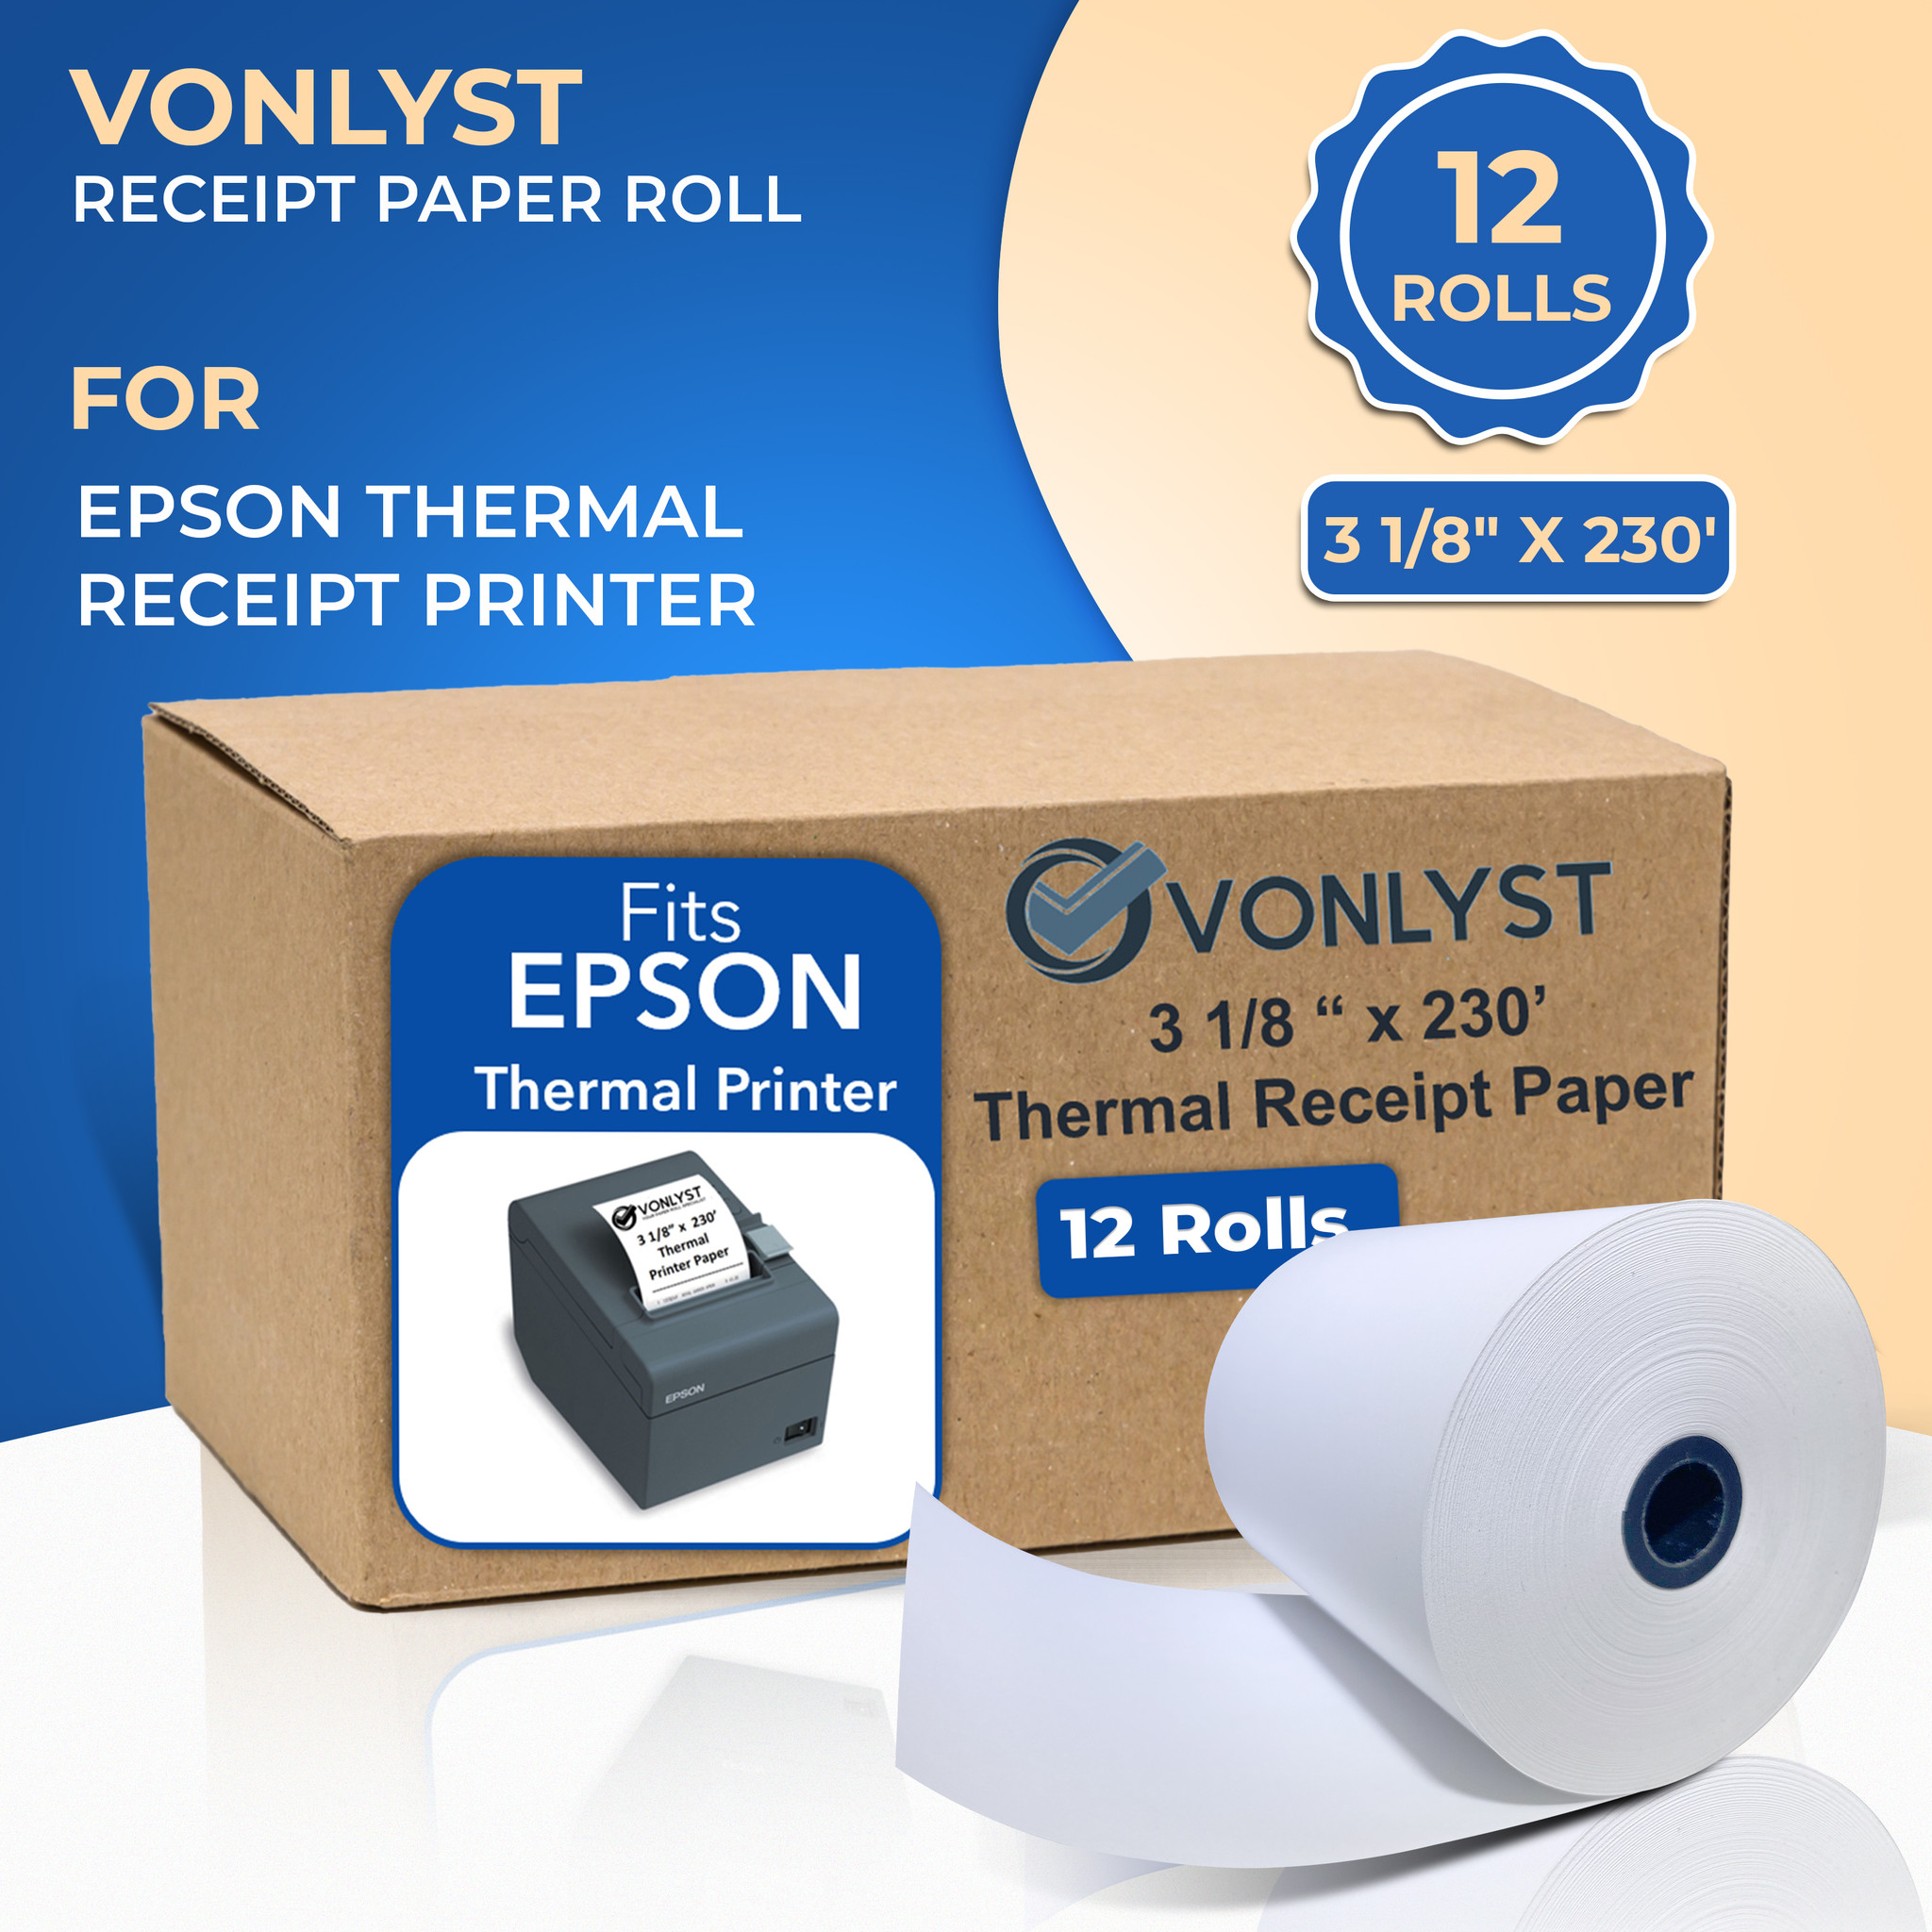 https://cdn11.bigcommerce.com/s-bhwqs39bls/images/stencil/2048x2048/products/193/1169/12_Vonlyst_3-1-8-x-230_Cash_Register_Thermal_Paper_Roll_for_Epson__60434.1661692953.jpg?c=2